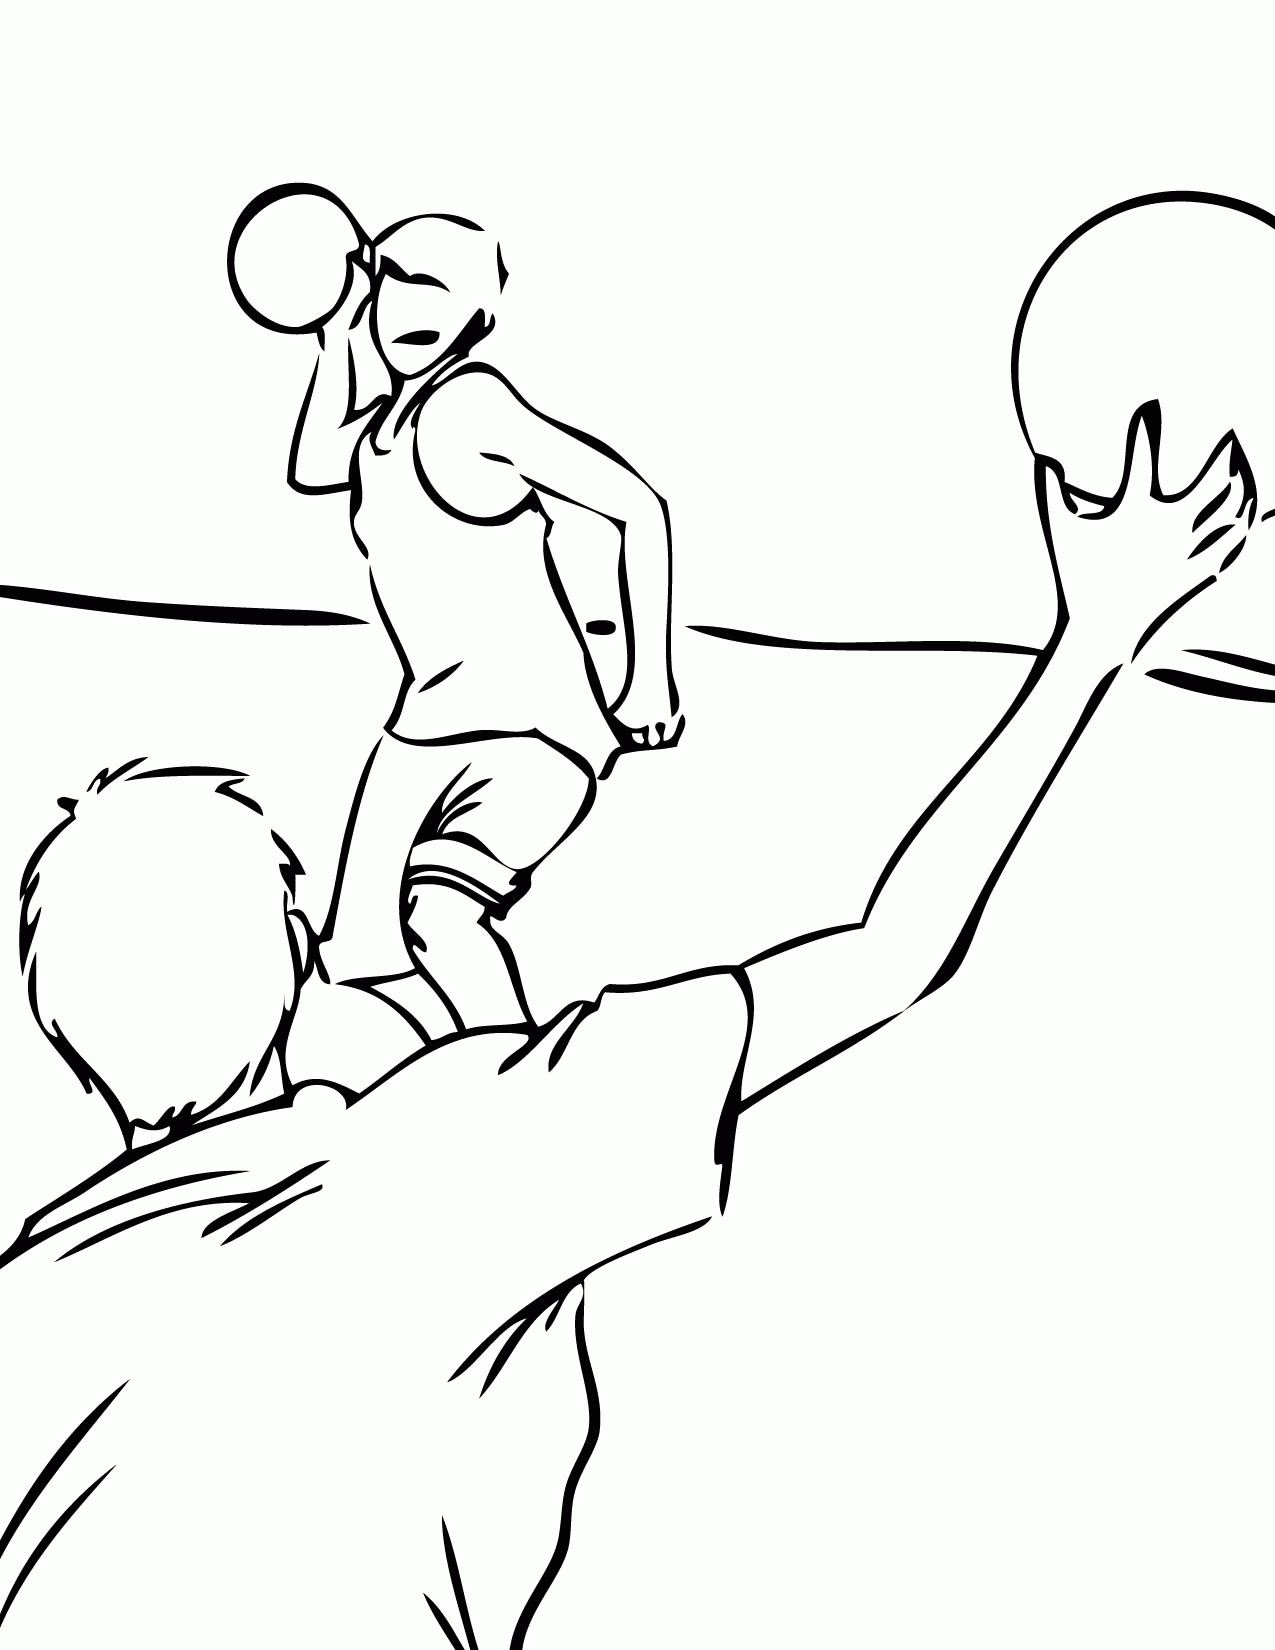 Dodgeball Coloring Page - Handipoints